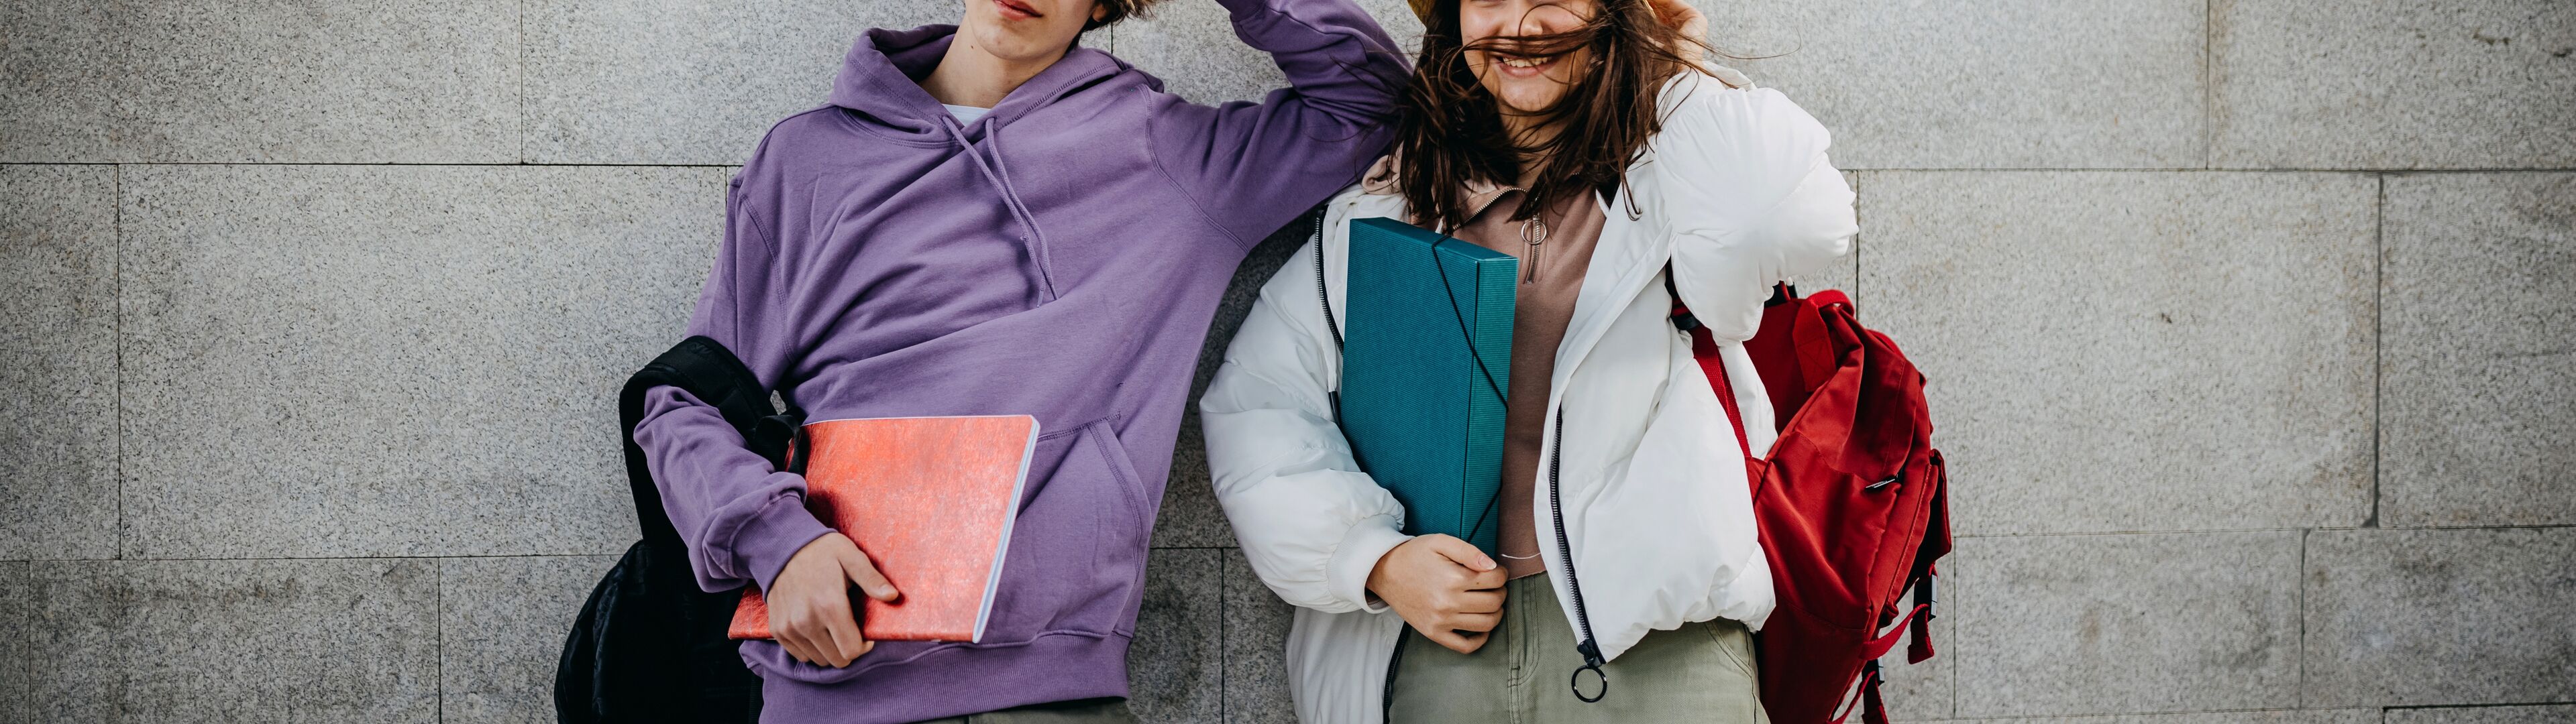 Two cheerful students in casual attire pose against a grey wall, each holding a notebook.